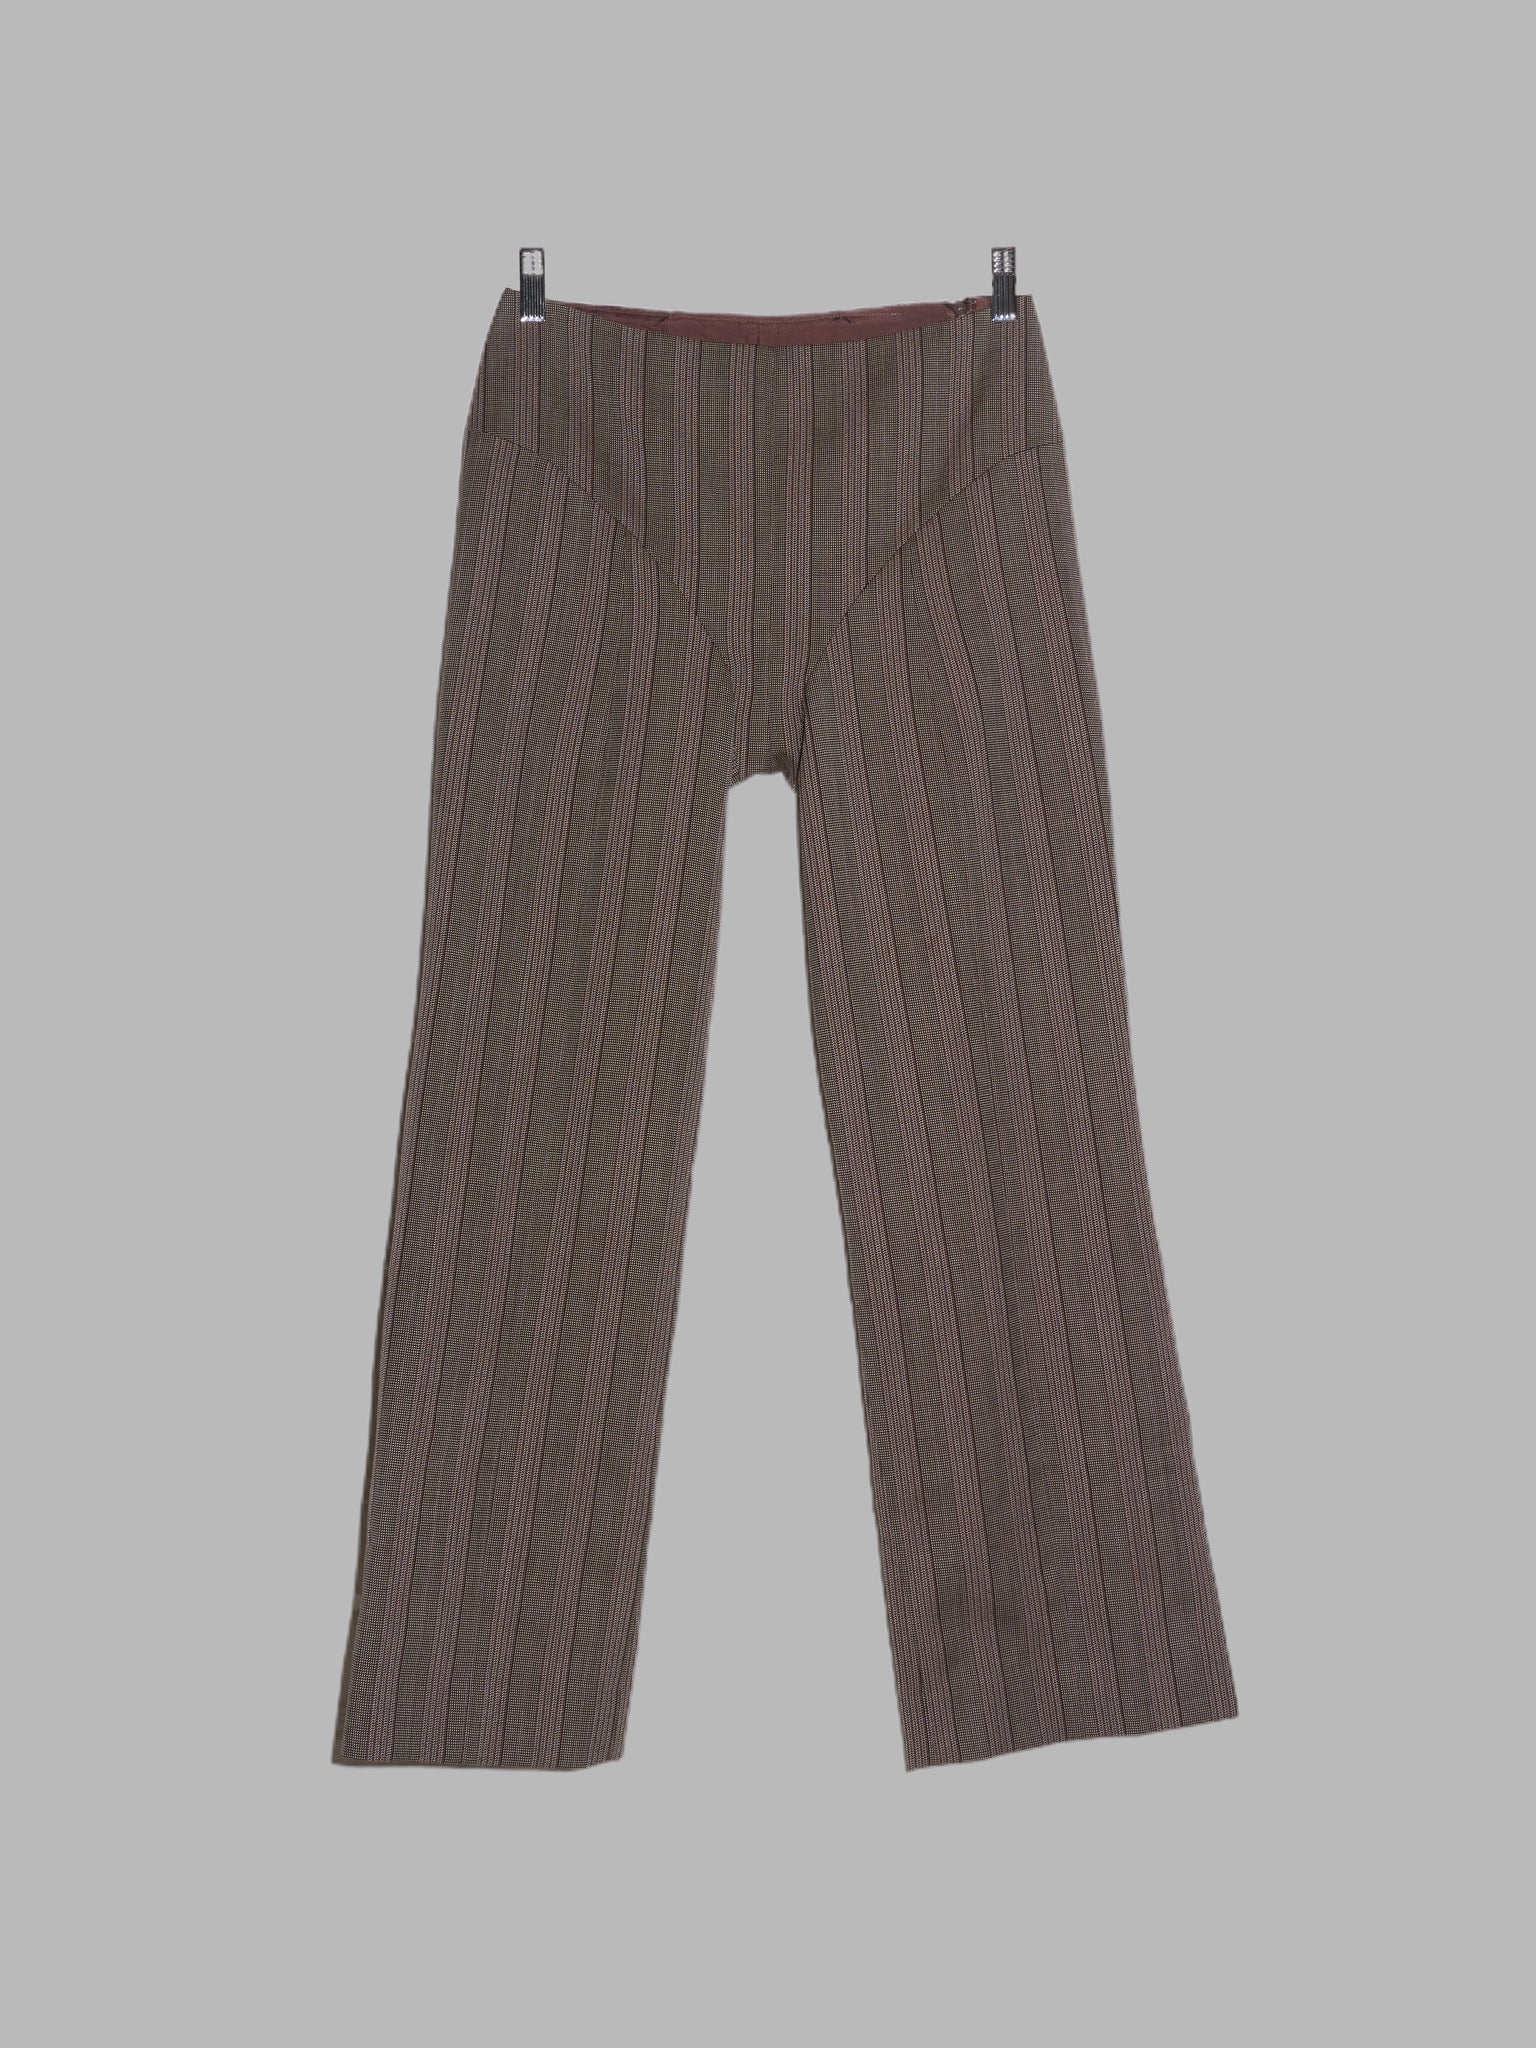 Junya Watanabe Comme des Garcons AW1997 brown striped wool 3D panelled trousers